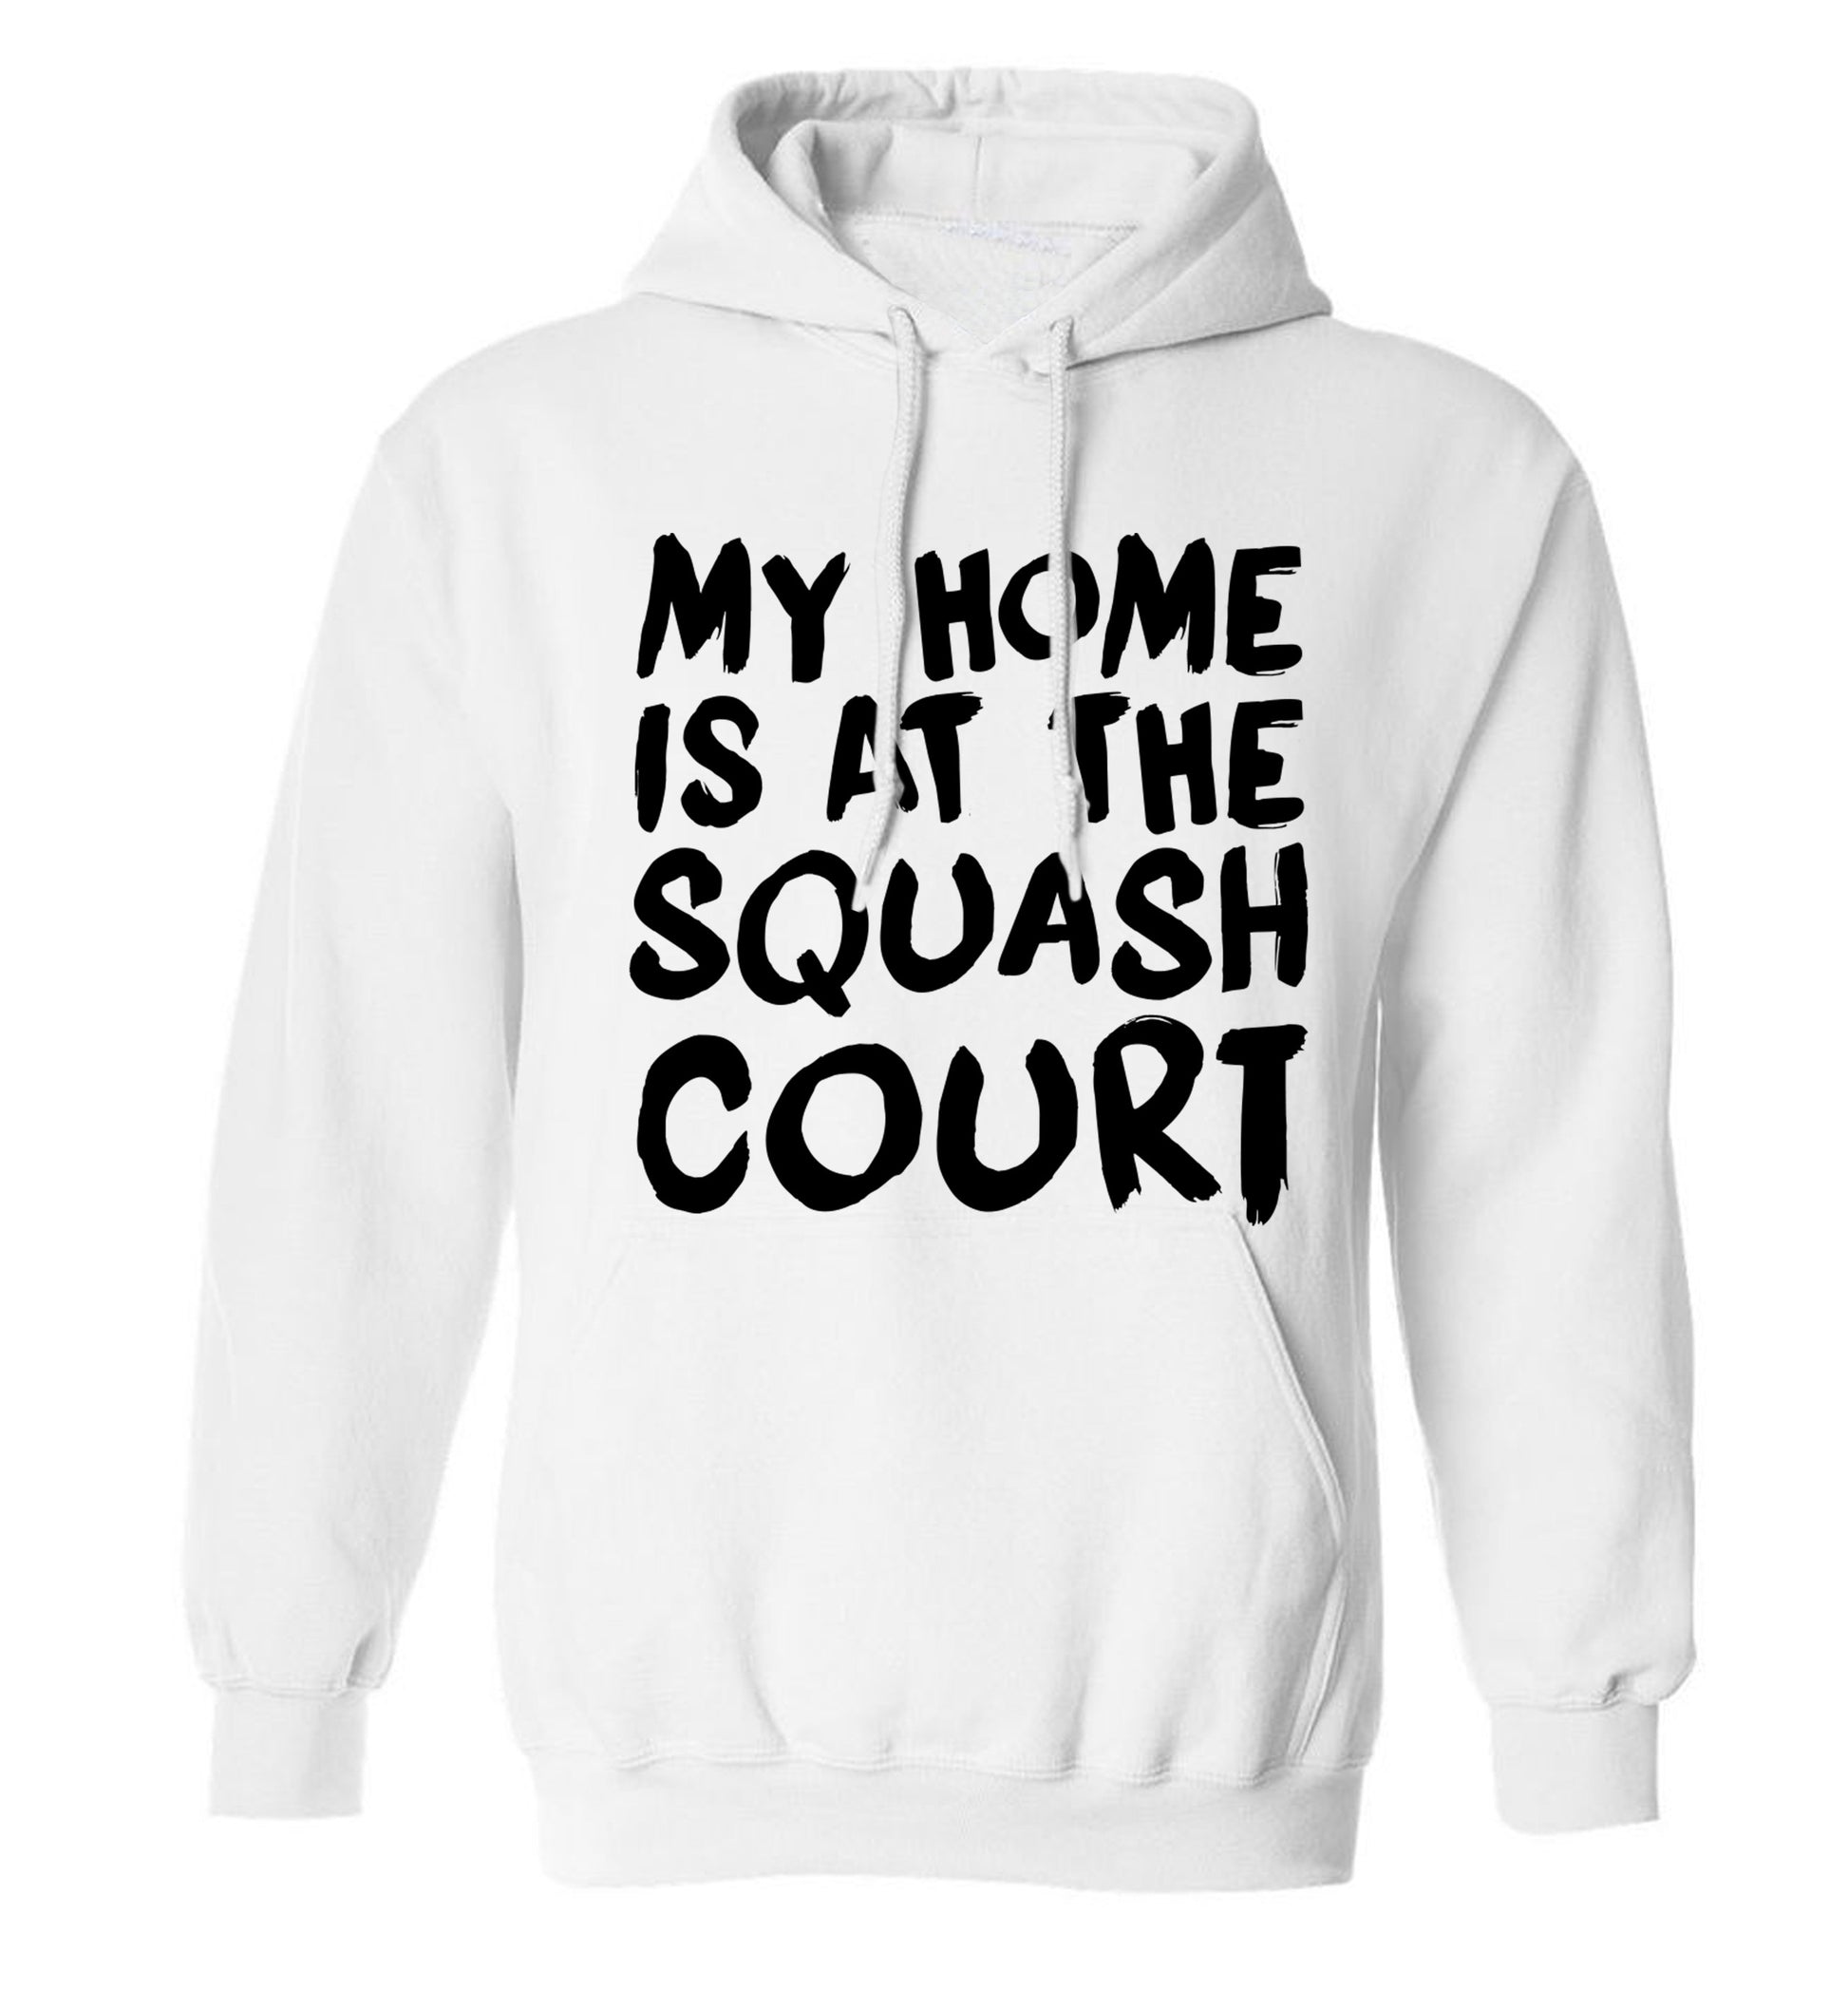 My home is at the squash court adults unisex white hoodie 2XL